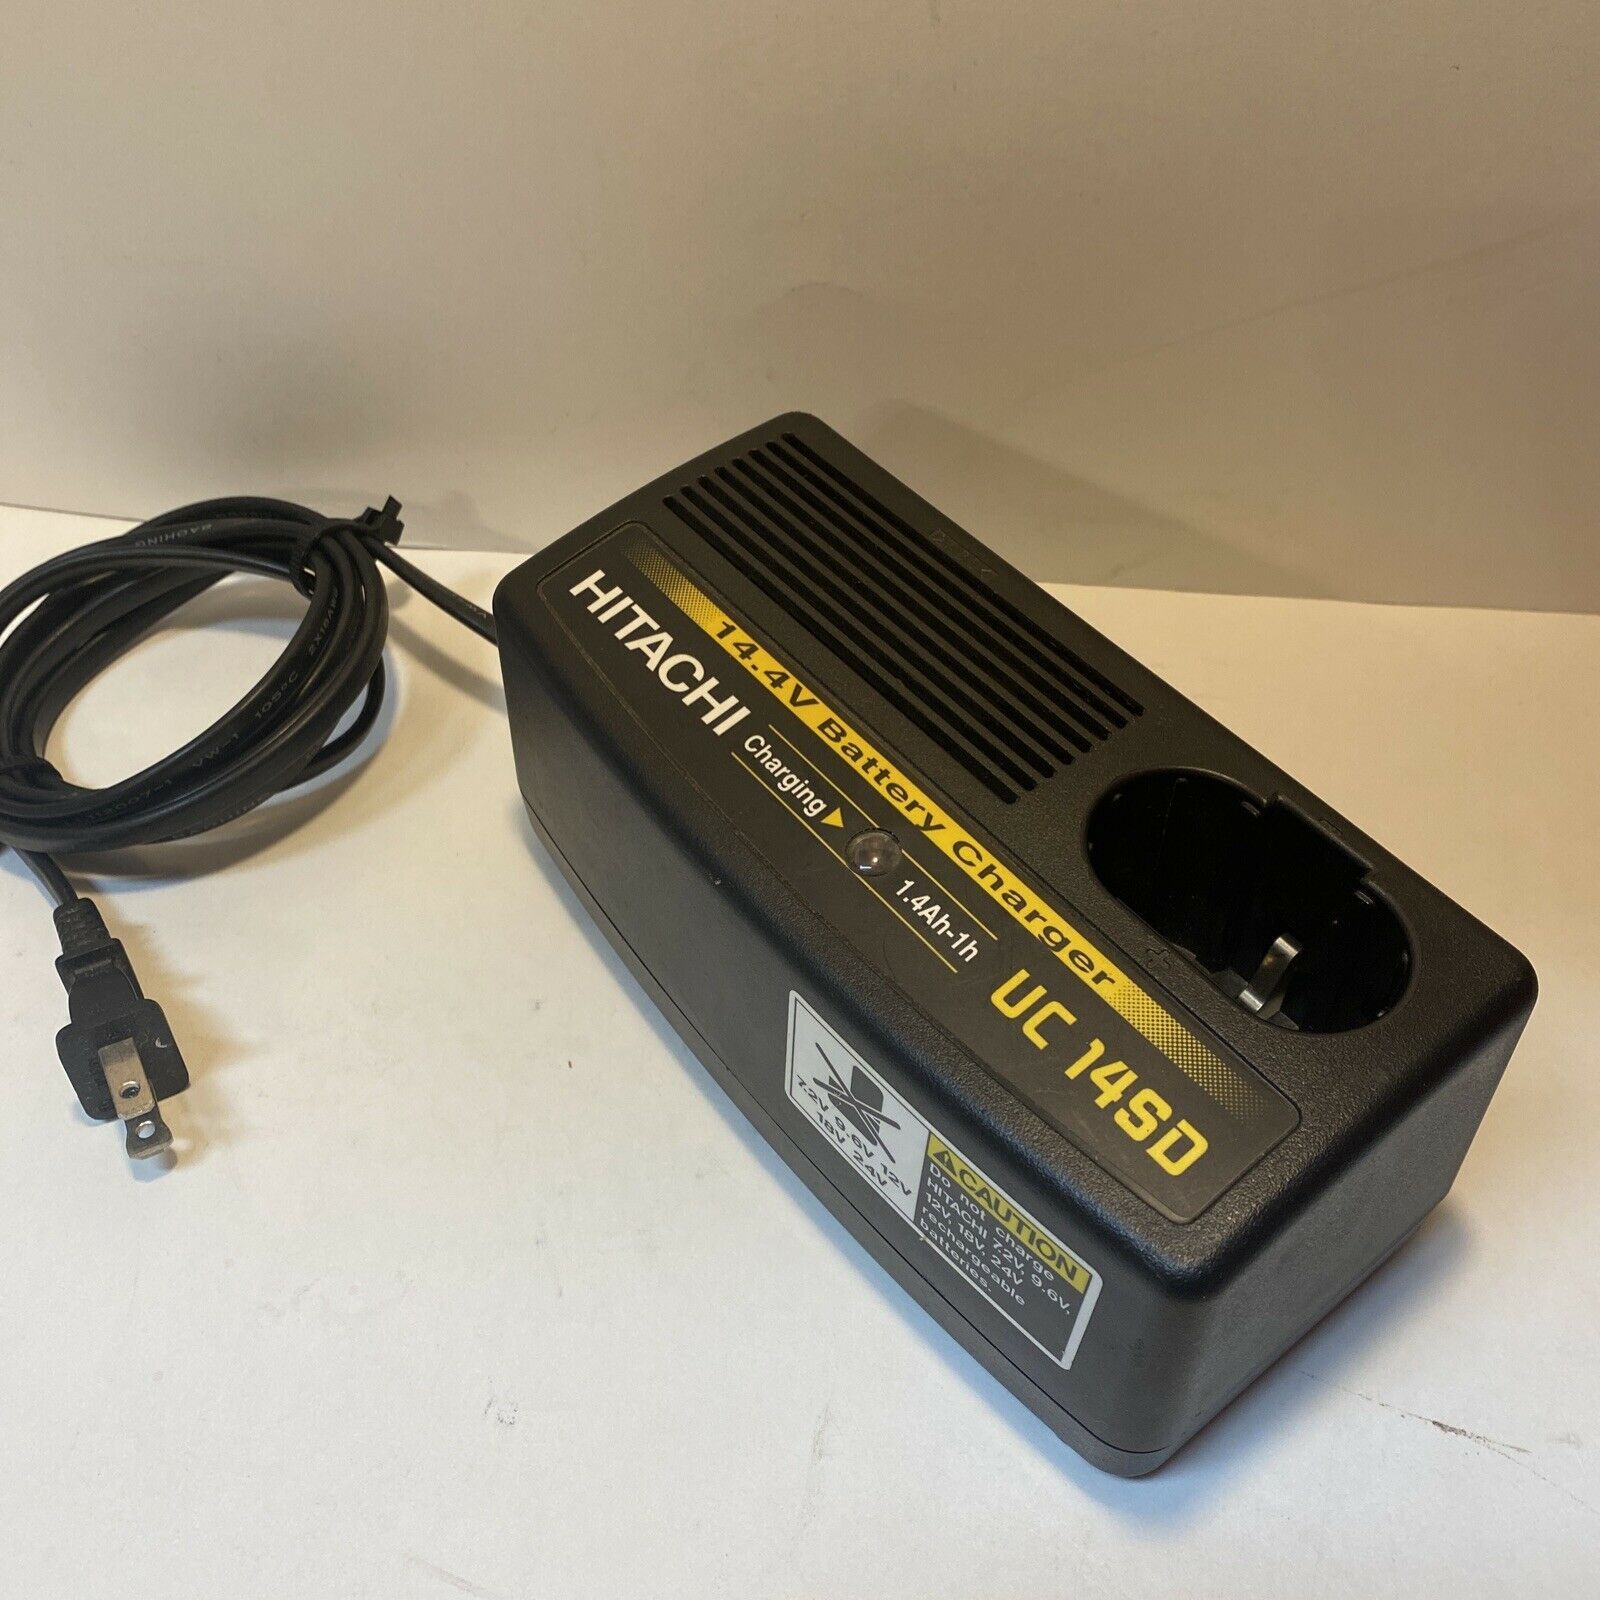 Replacement Battery Charger and Decker 14.4v- Battery, Size: As described, Black